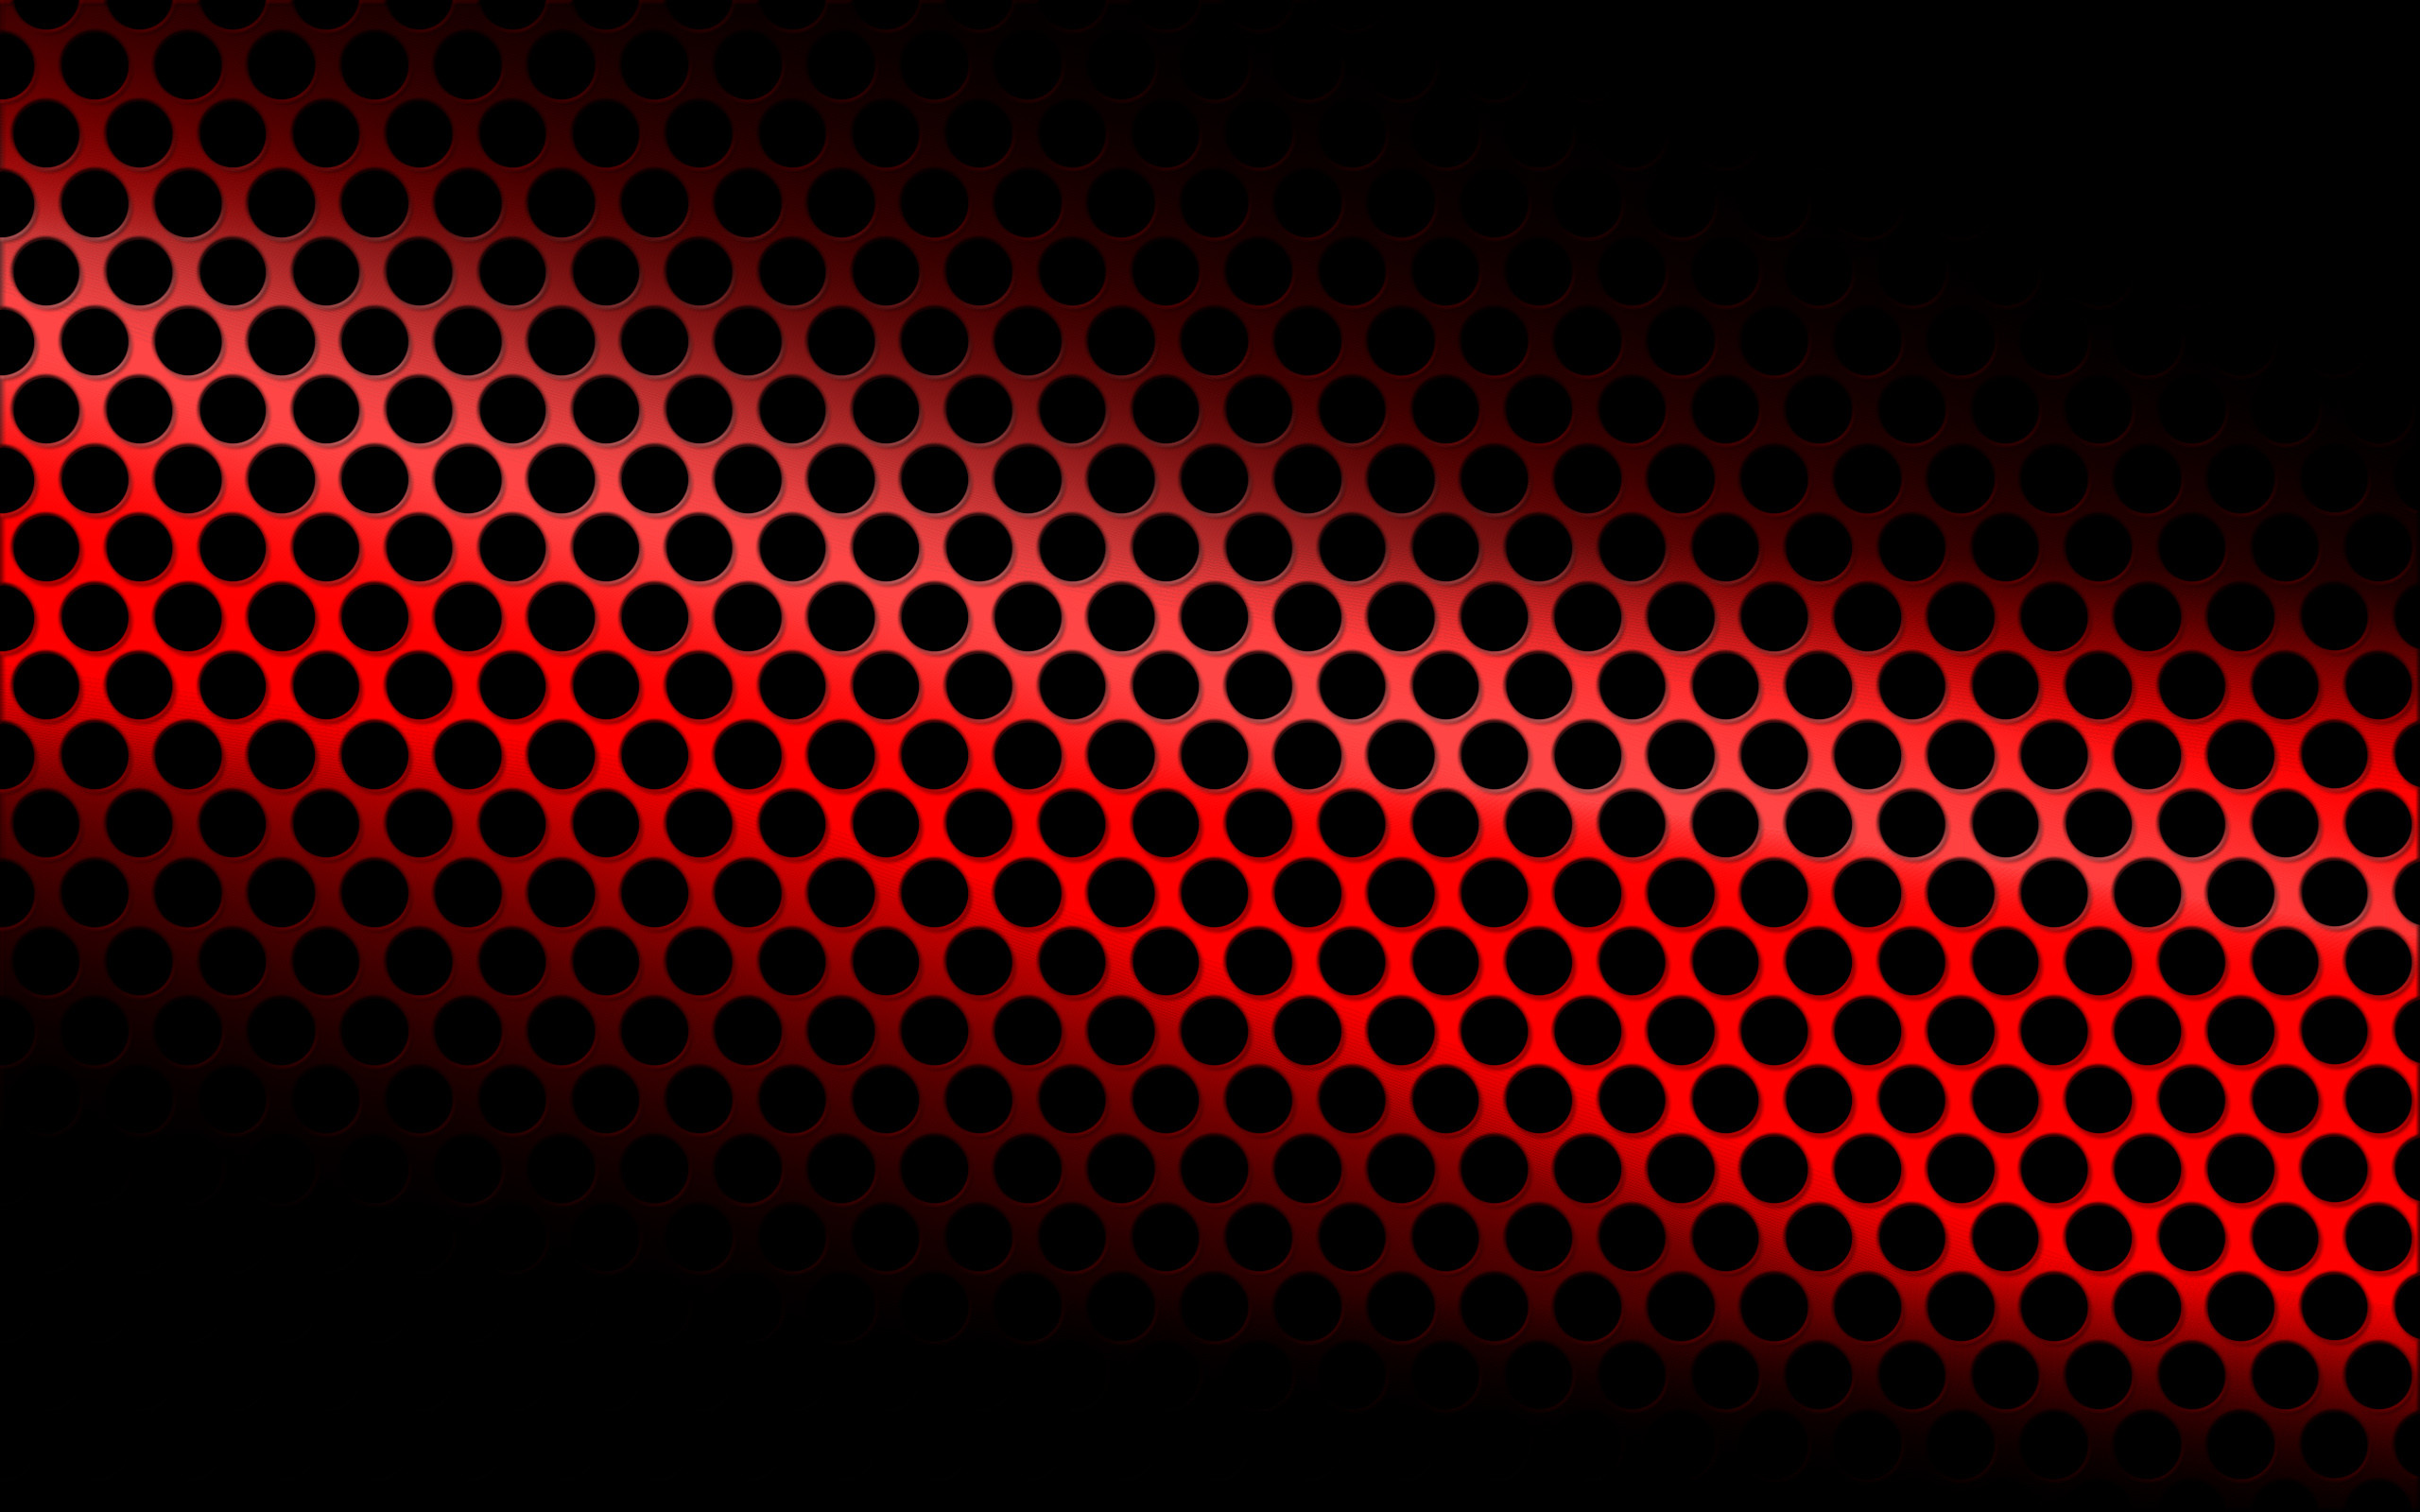 2560x1600 Image detail for Red Abstract free beautiful wallpaper download | HD  Wallpapers | Pinterest | Desktop backgrounds, Red wallpaper and Hd wallpaper